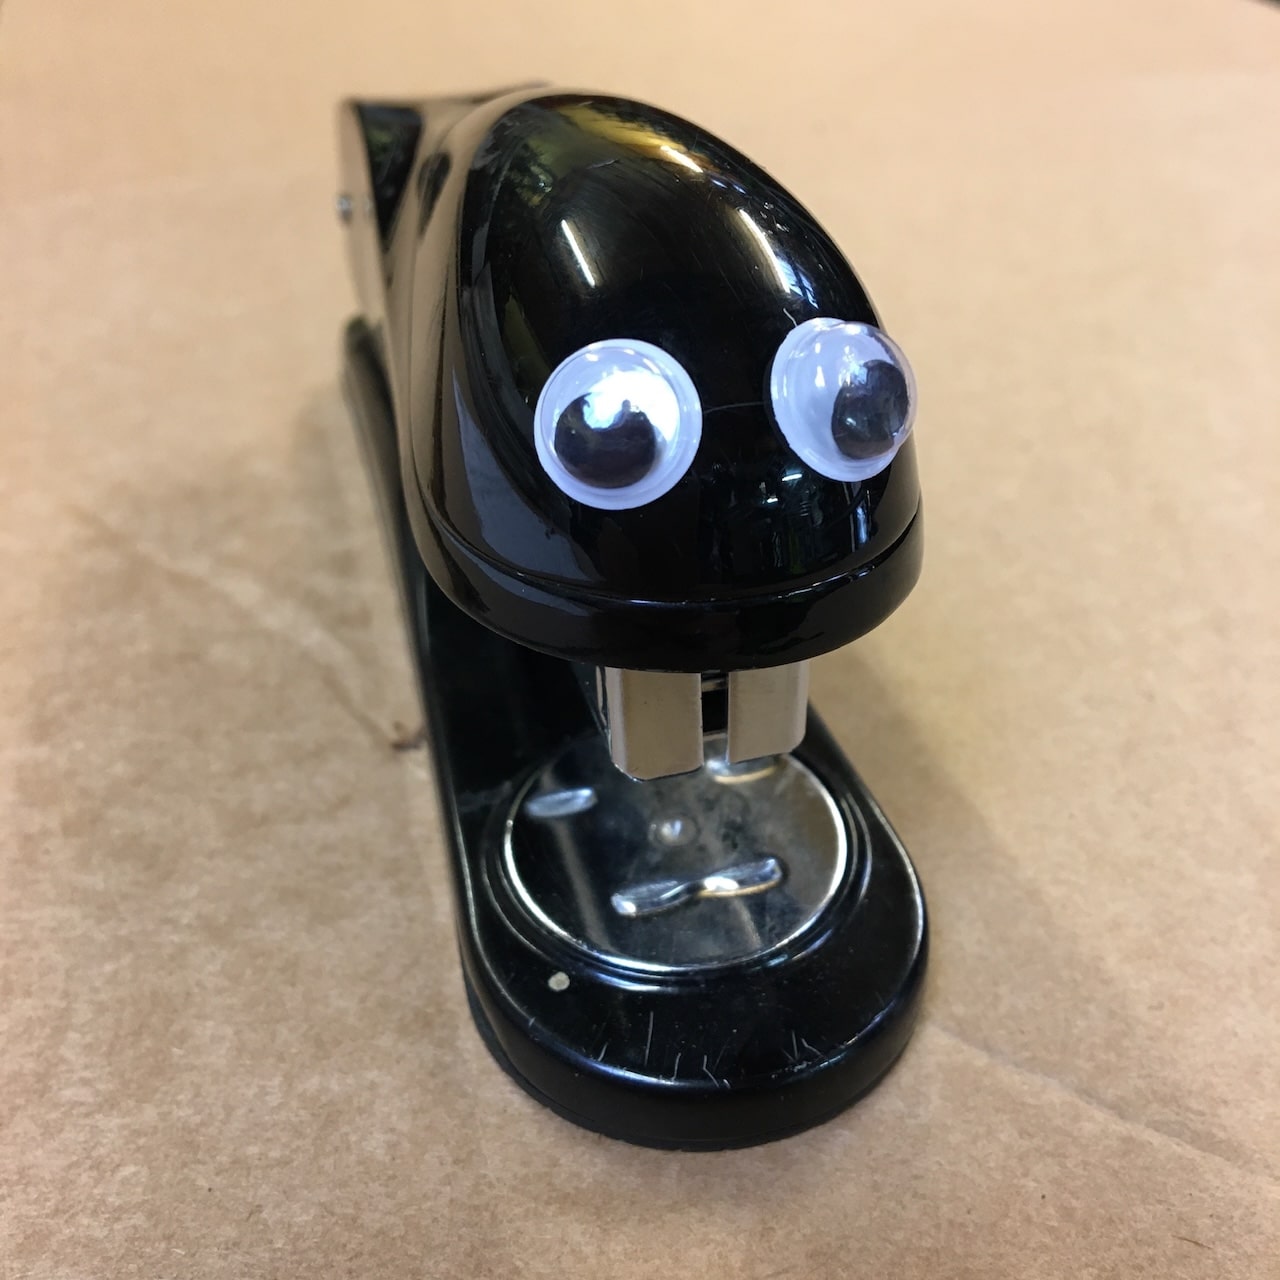 Stapler With Stick on Eyes